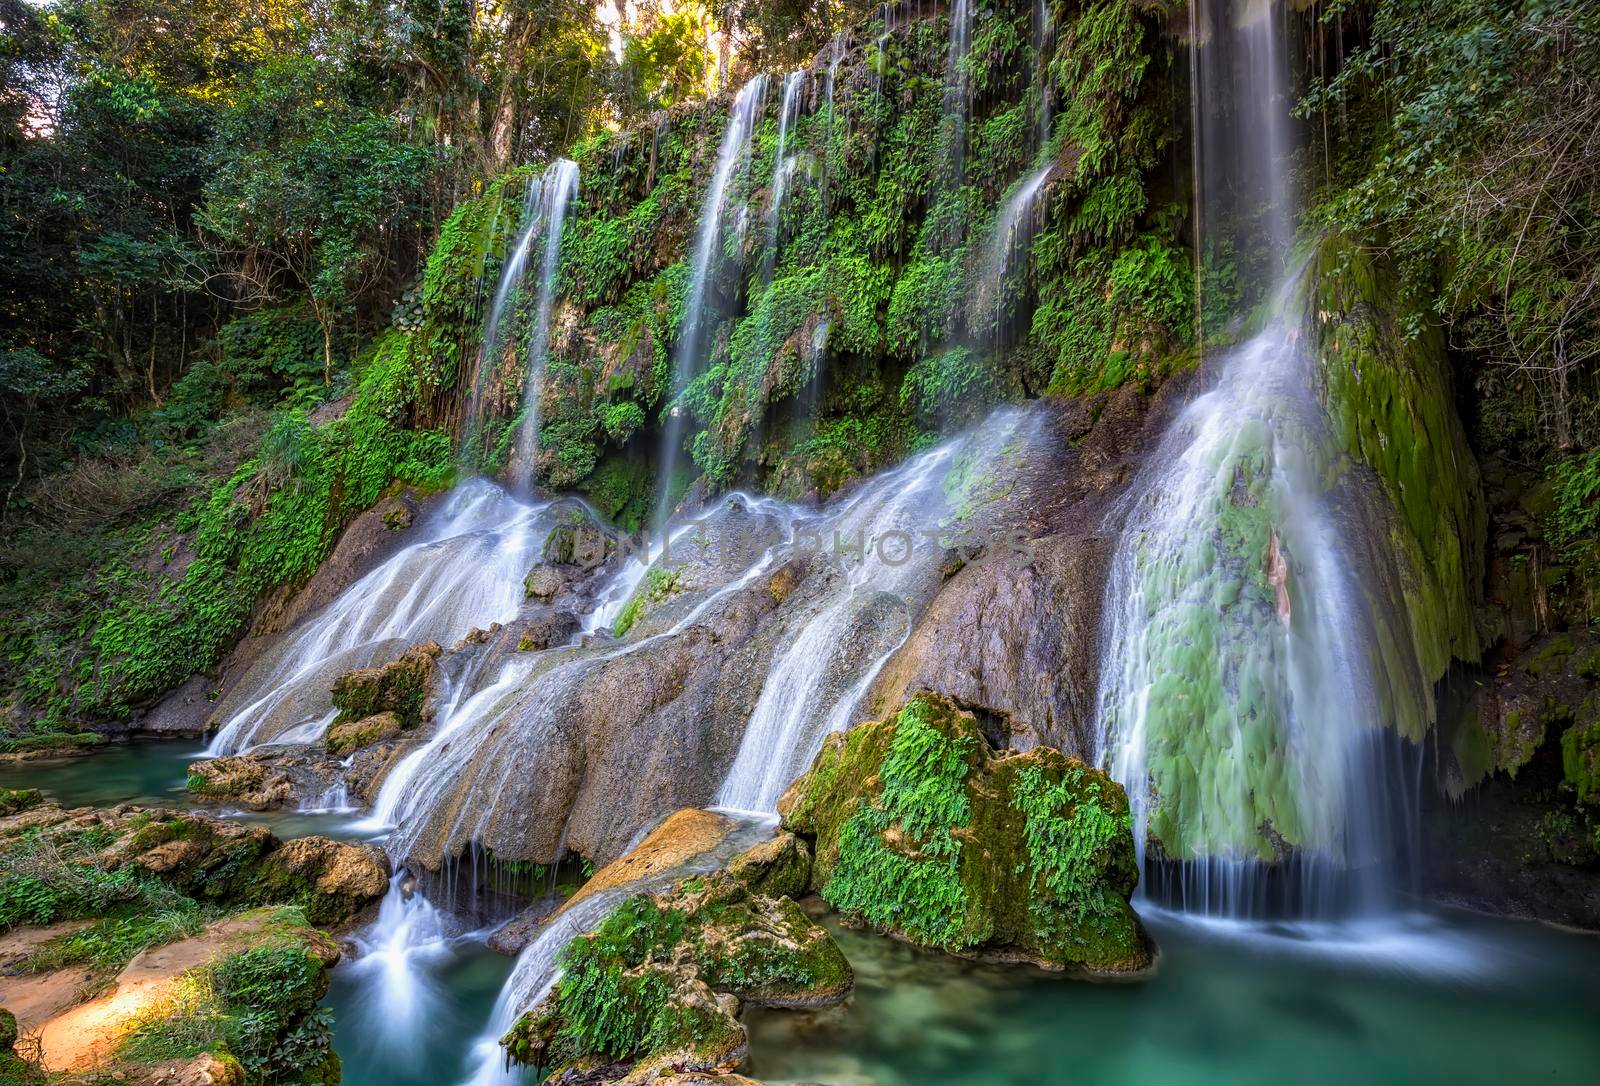 El Nicho Waterfalls in Cuba. El Nicho is located inside the Gran Parque Natural Topes de Collantes a forested park that extends across the Sierra Escambray mountain range in central Cuba.